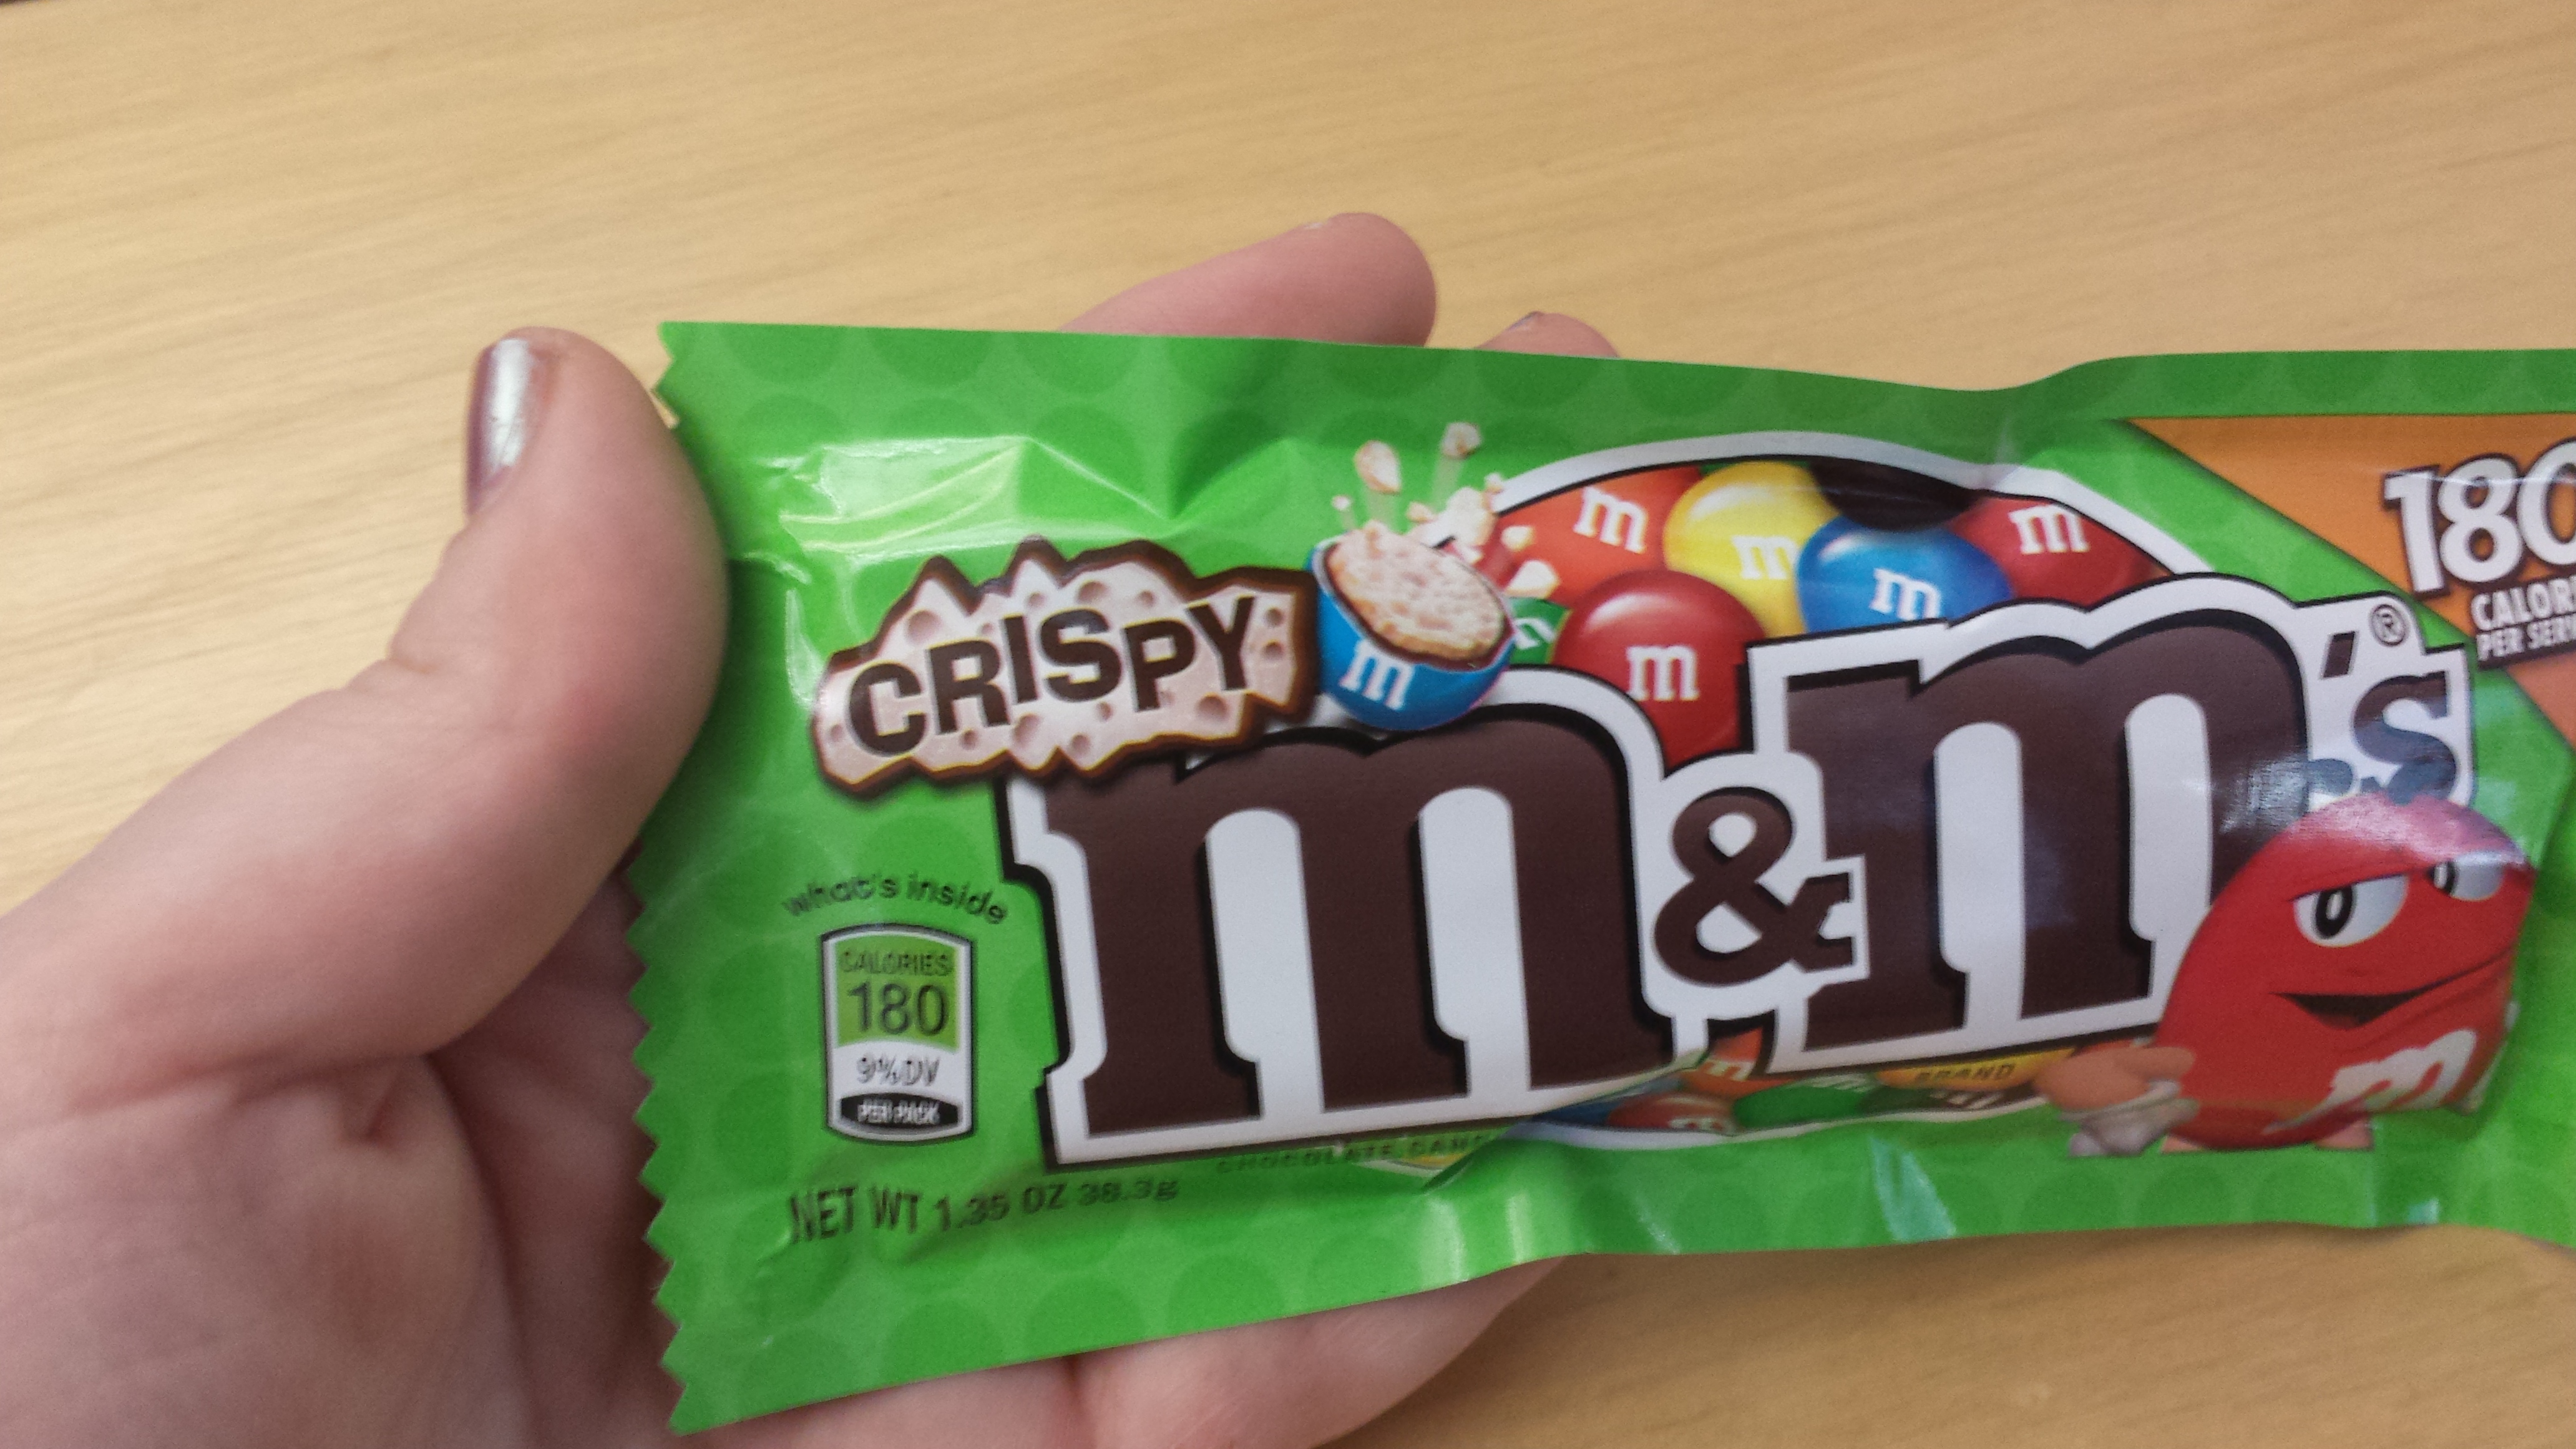 Review: Crunchy Honeycomb M&M's - Morsels & The Shelf Life